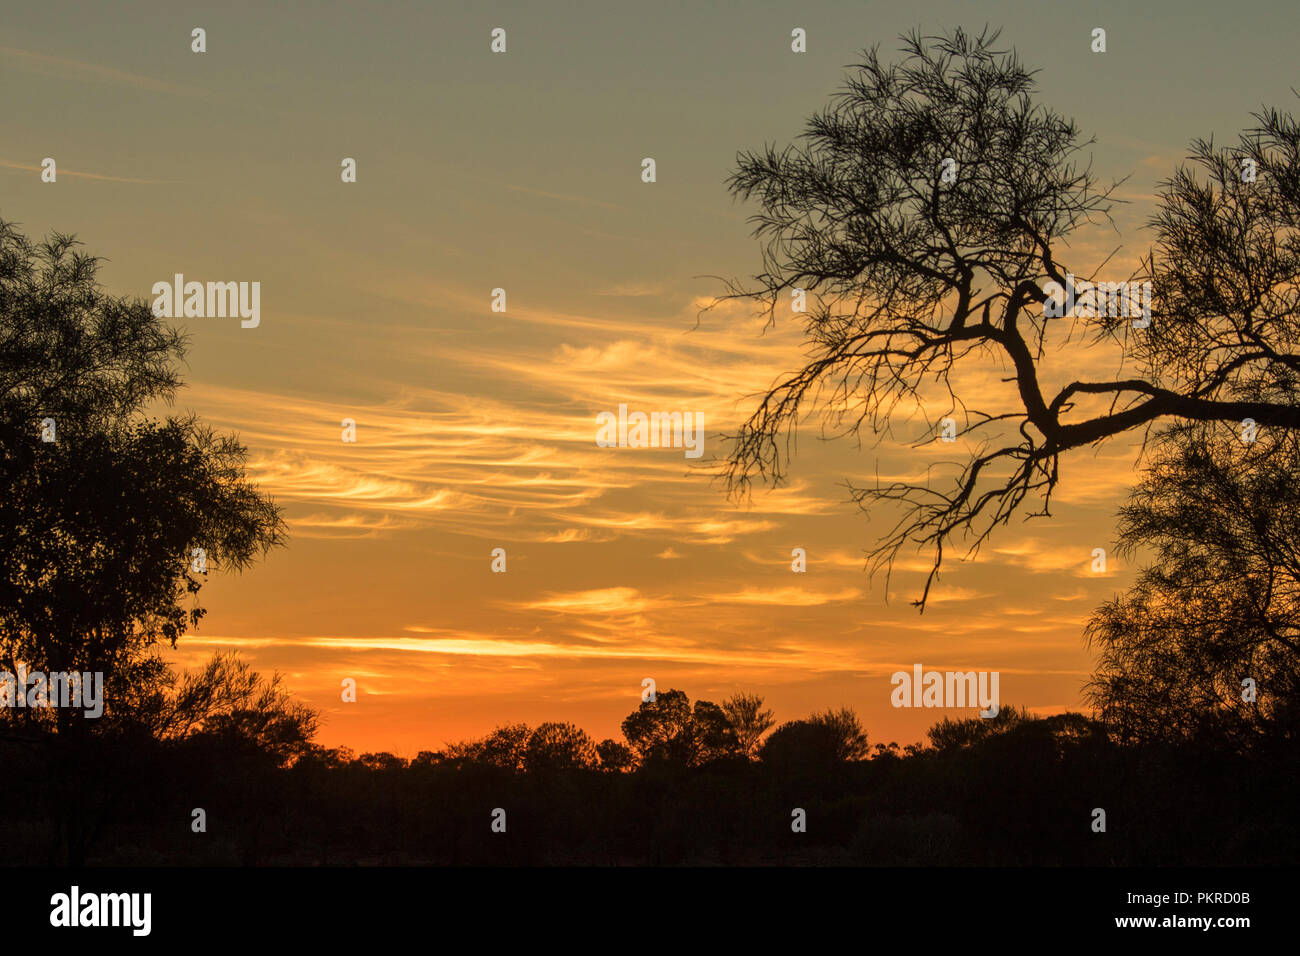 Sunset / sunrise with dead tree silhouetted against golden sky streaked with clouds in outback Queensland Australia Stock Photo